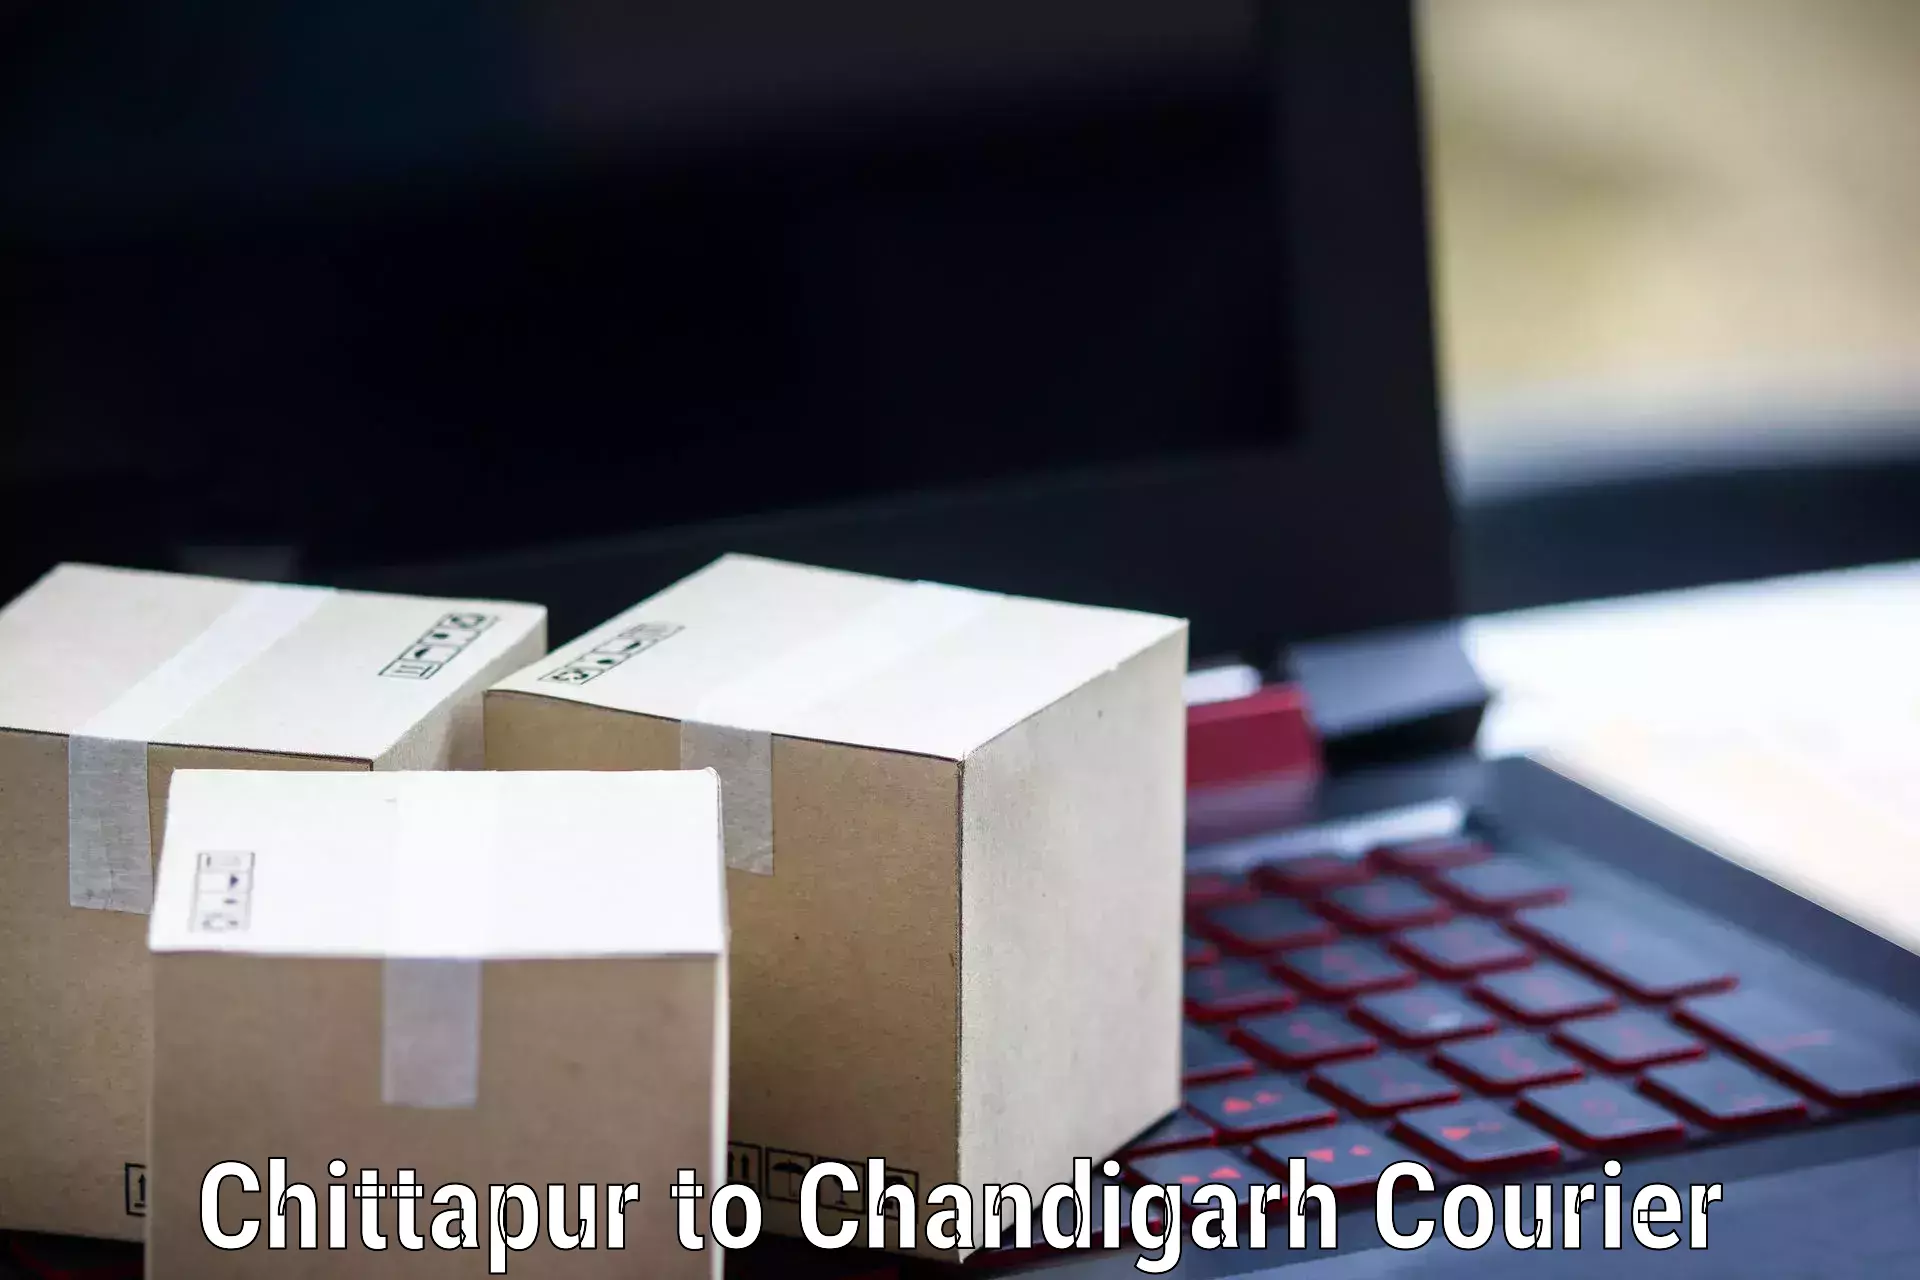 Local delivery service Chittapur to Chandigarh